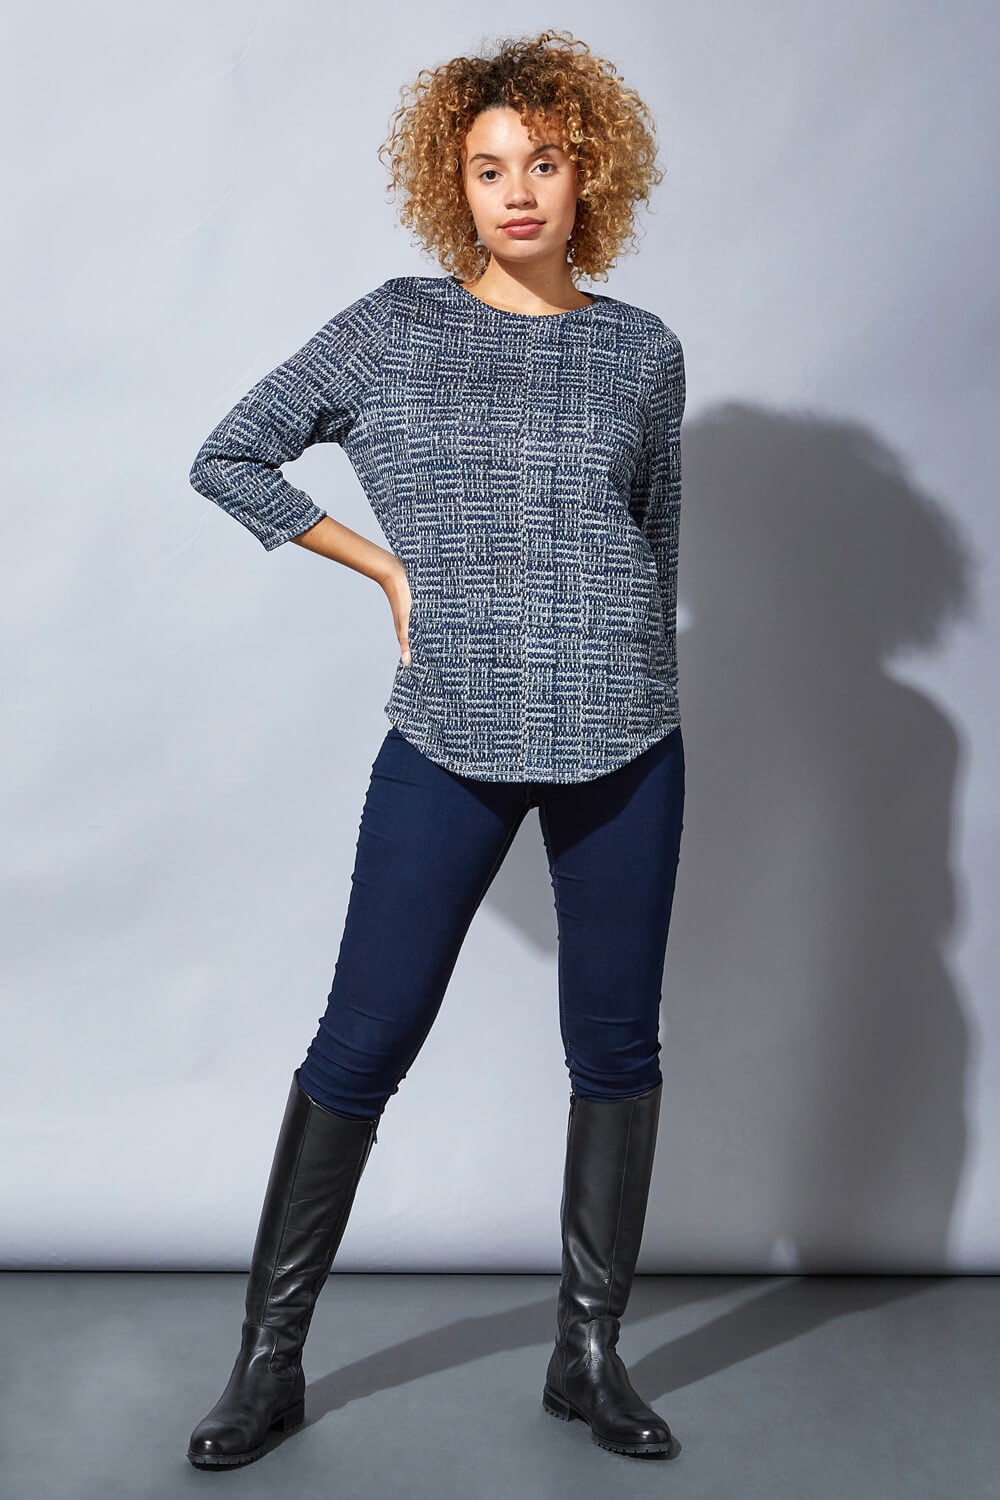 Blue Contrast Check Print Jersey Knit Top, Image 2 of 5